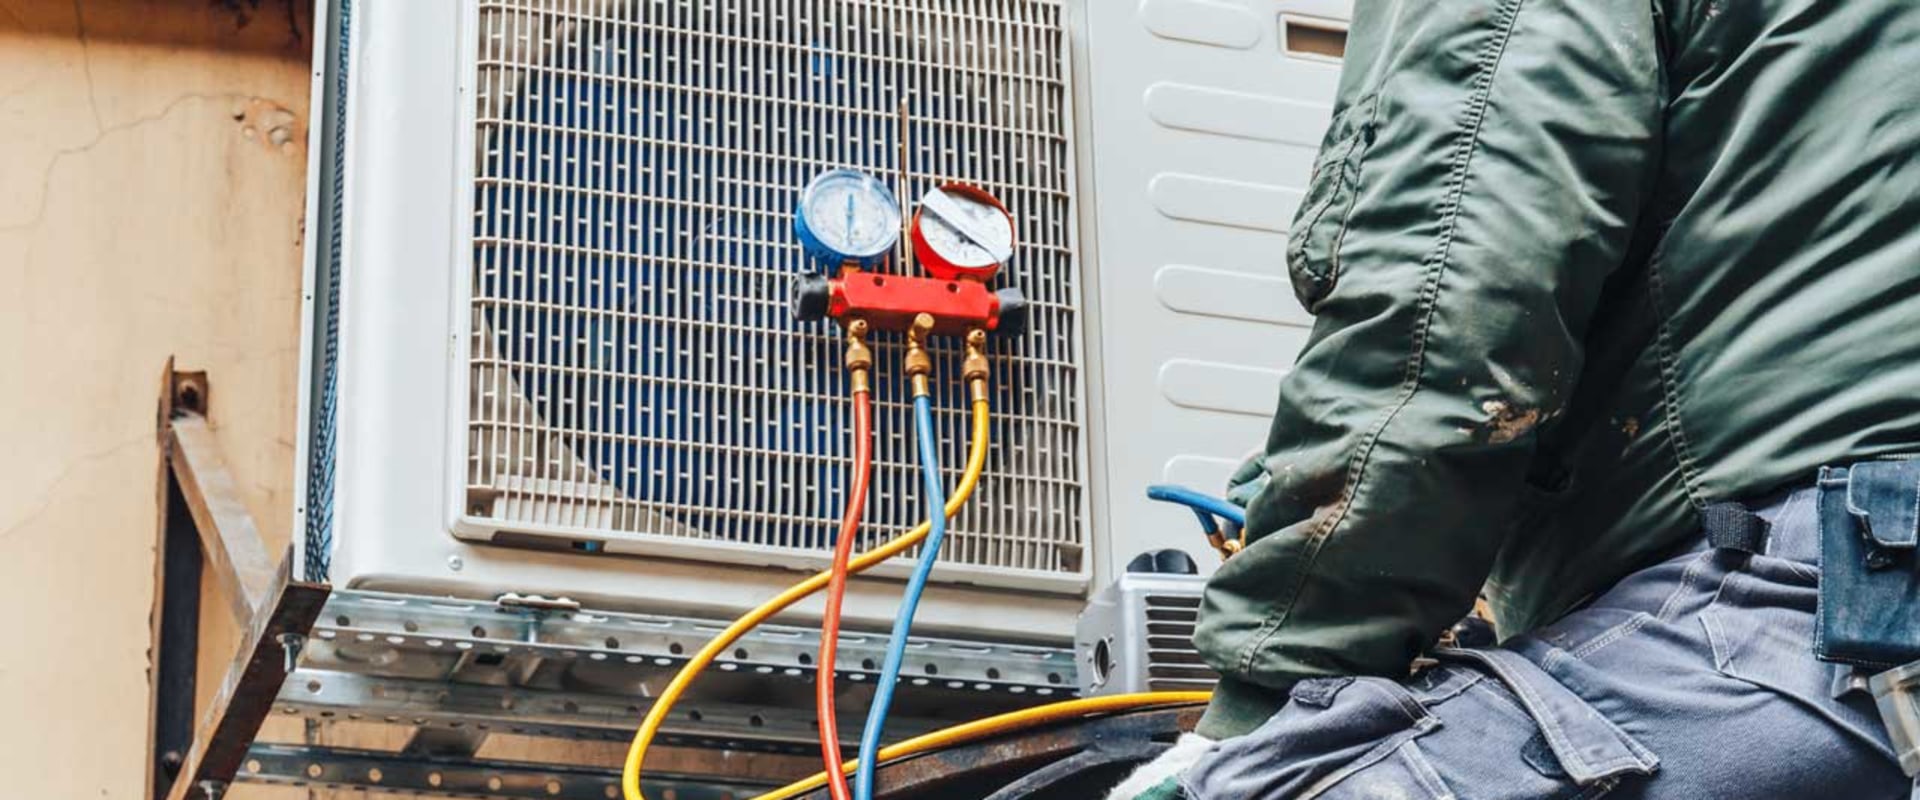 Air Conditioning Repair, Installation, Heating and Air Conditioning Services in San Diego: AC Repair San Diego - HVAC Maintaining Refrigerant Levels